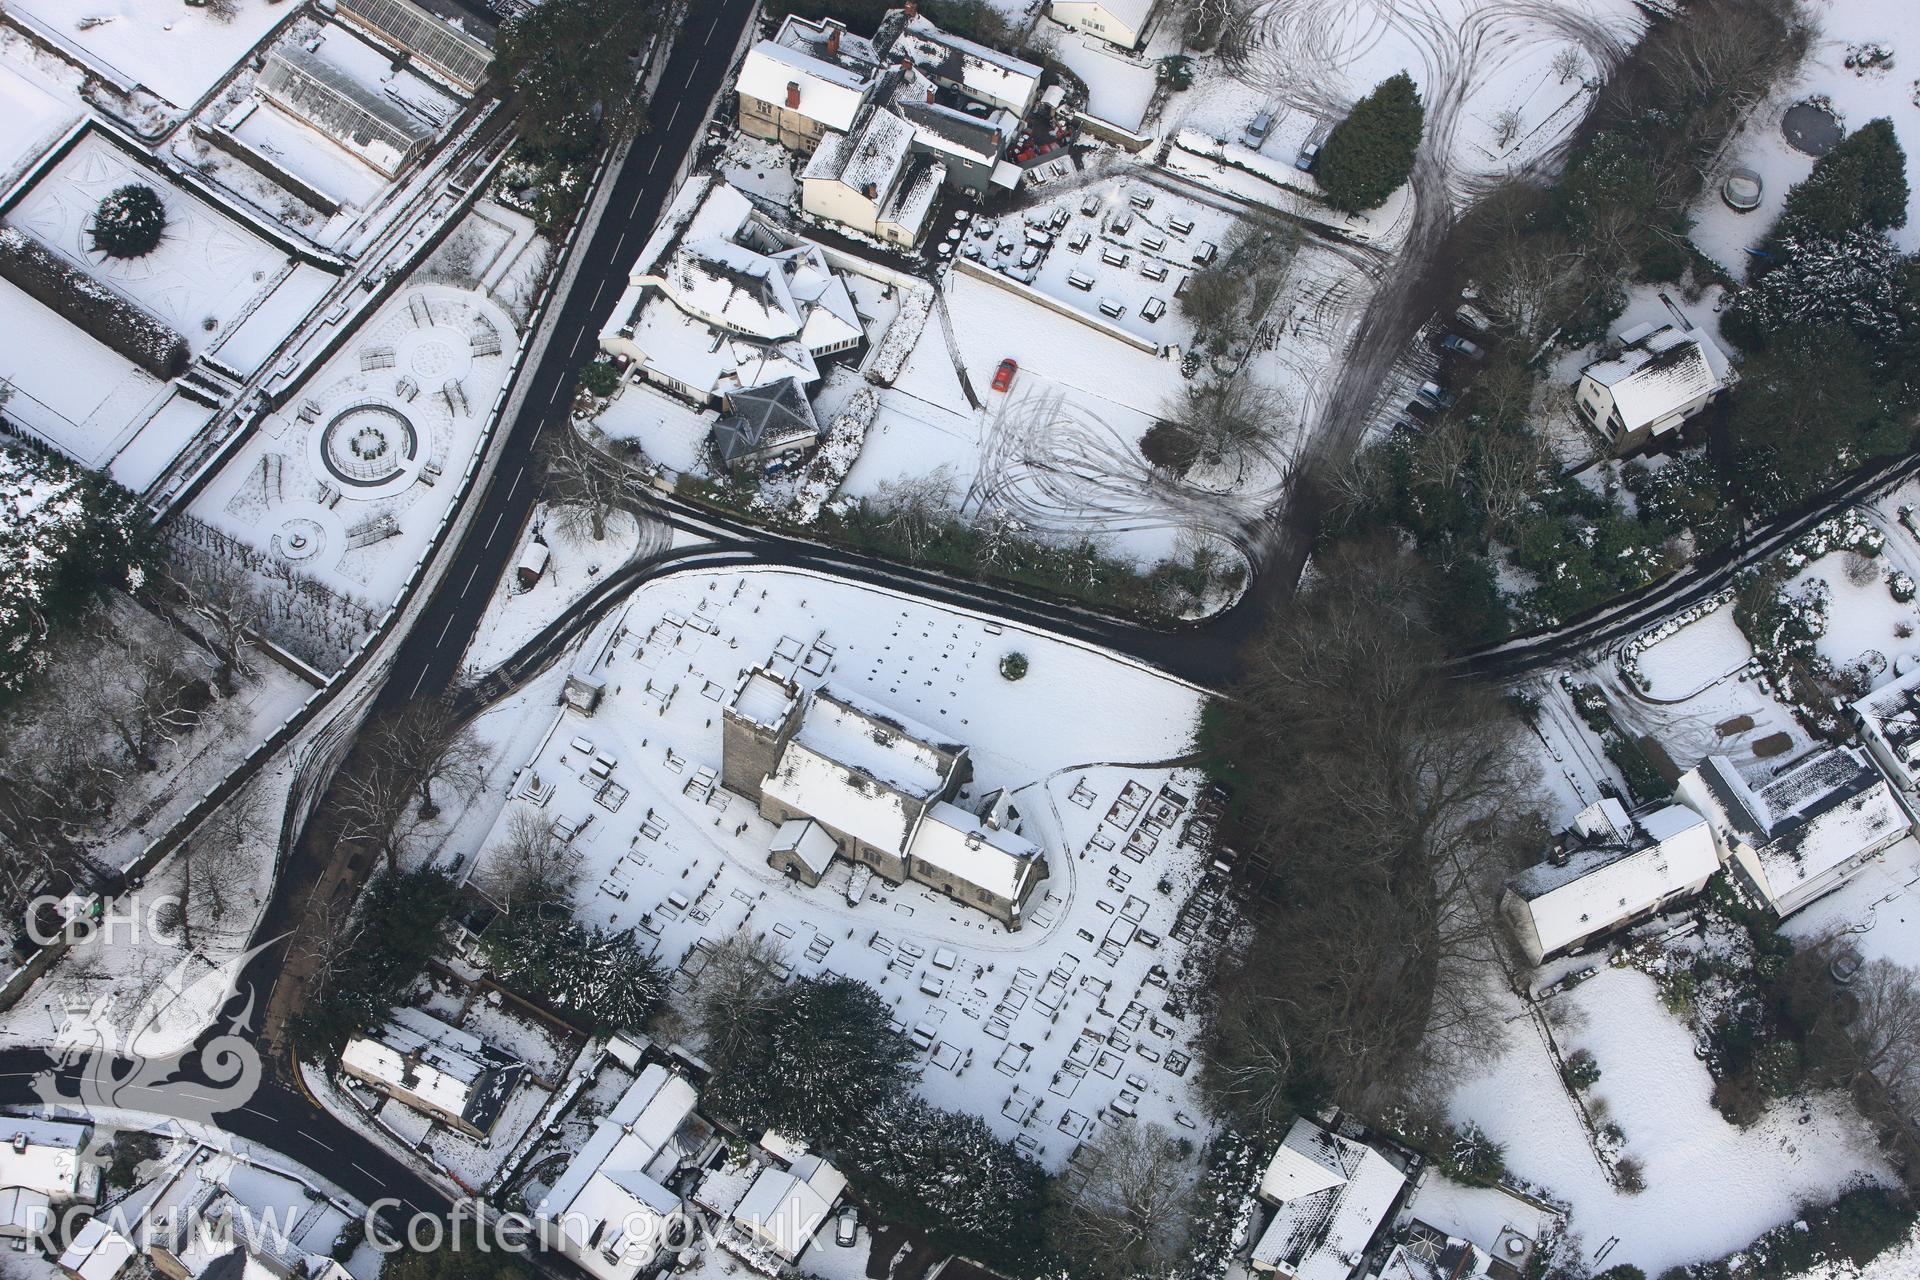 St Mary's church and the Plymouth Arms public house at St Fagans Mueseum of Welsh Life. Oblique aerial photograph taken during the Royal Commission?s programme of archaeological aerial reconnaissance by Toby Driver on 24th January 2013.